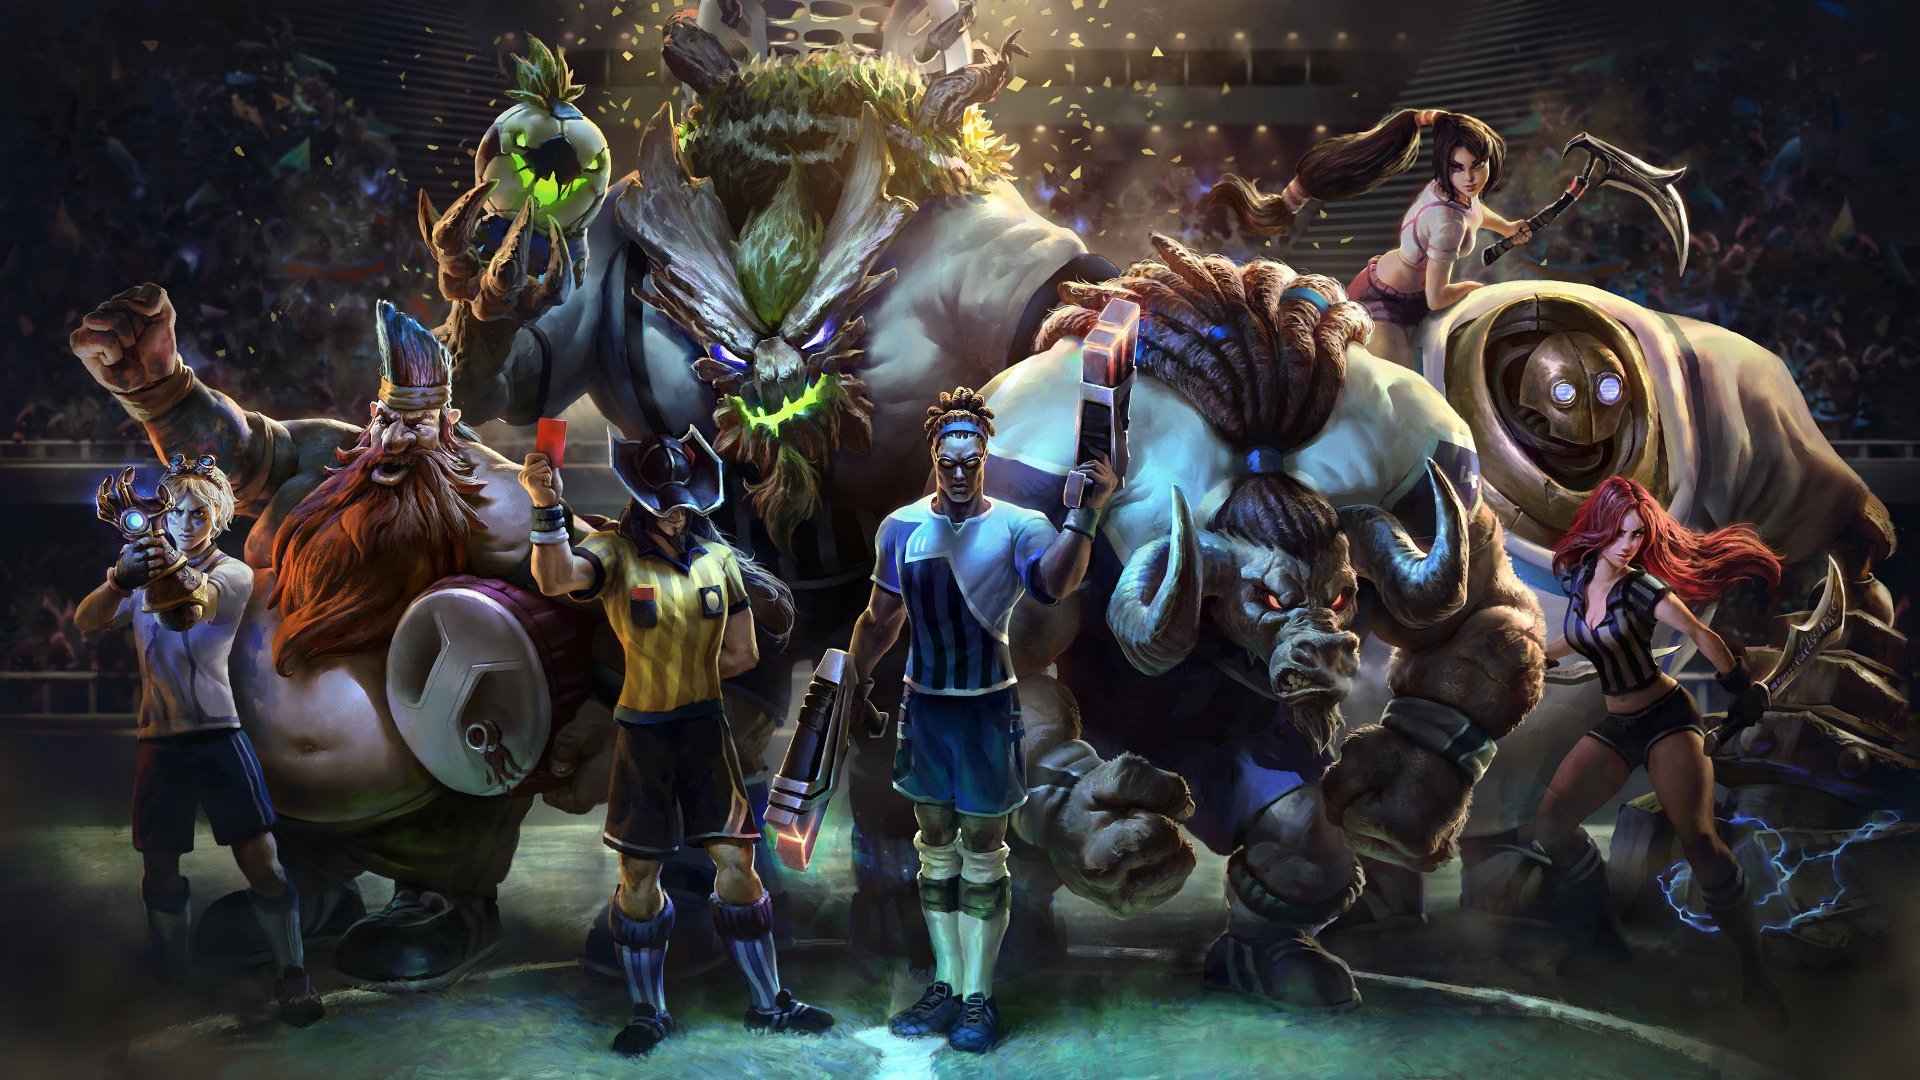 HD Wallpaper Picture Image Photo With Tags Of League Legends